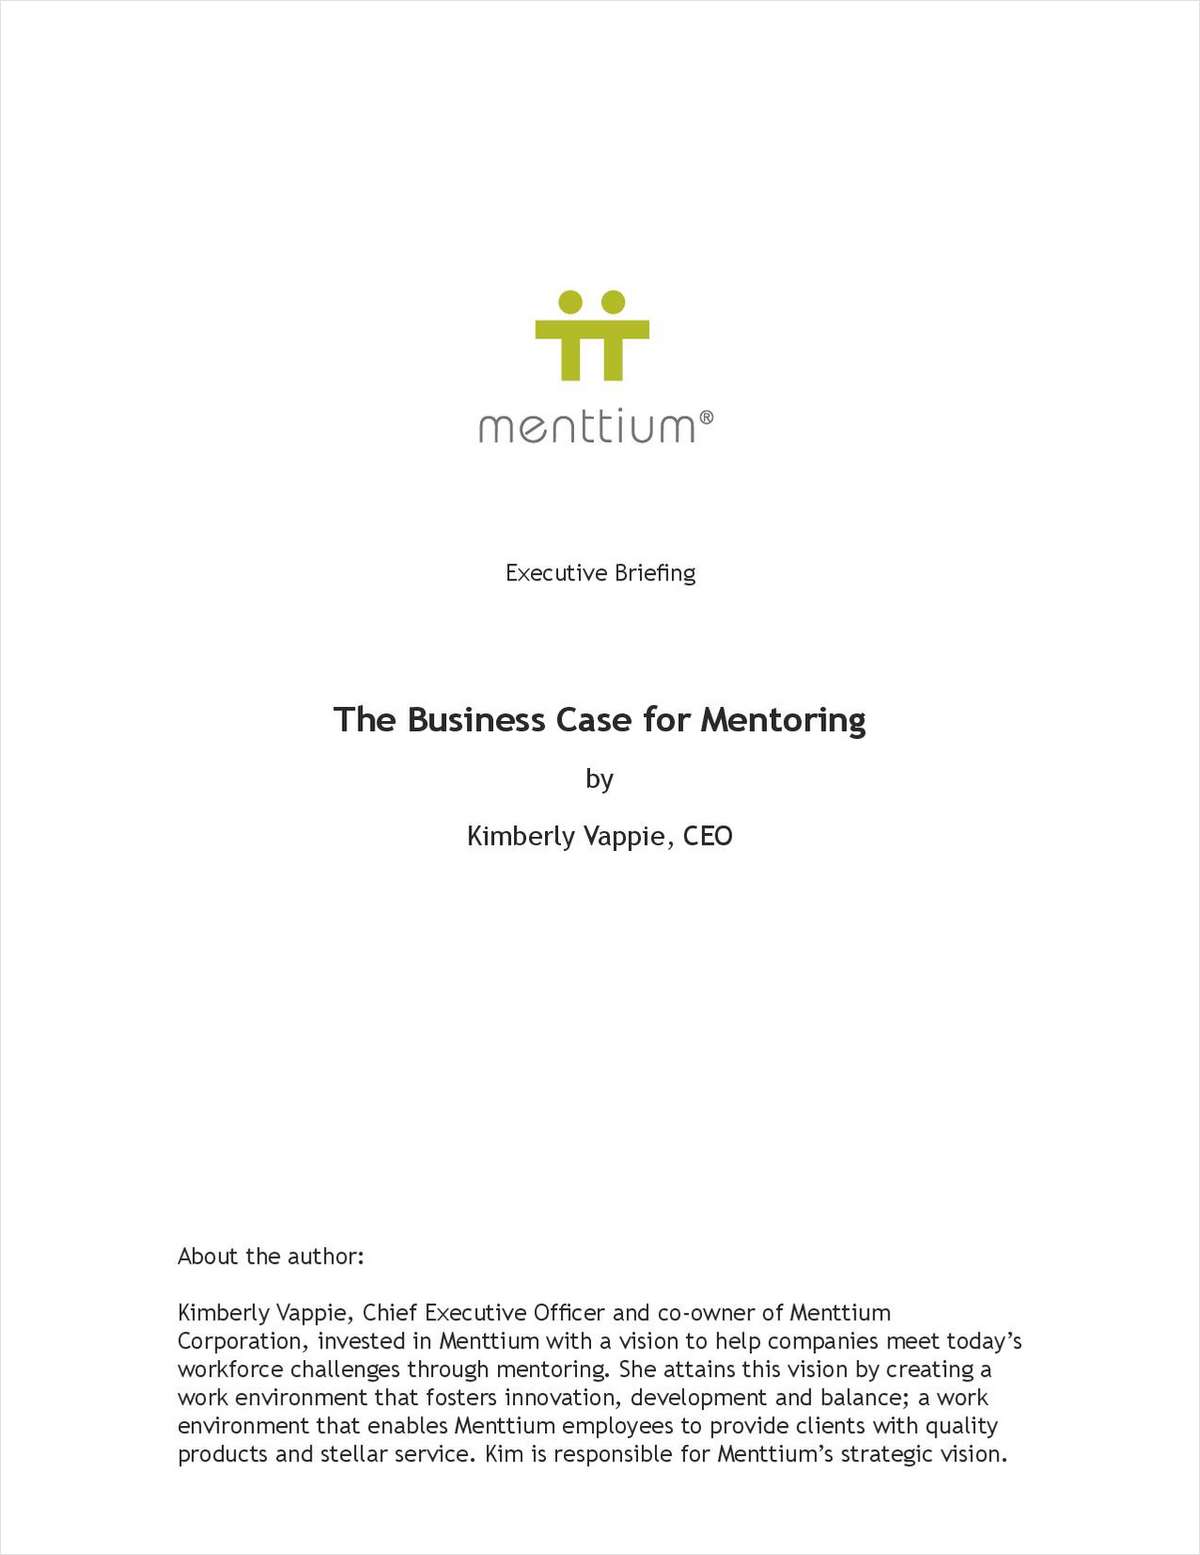 Business Case for Mentoring: Tangible Benefits Executives Should Understand